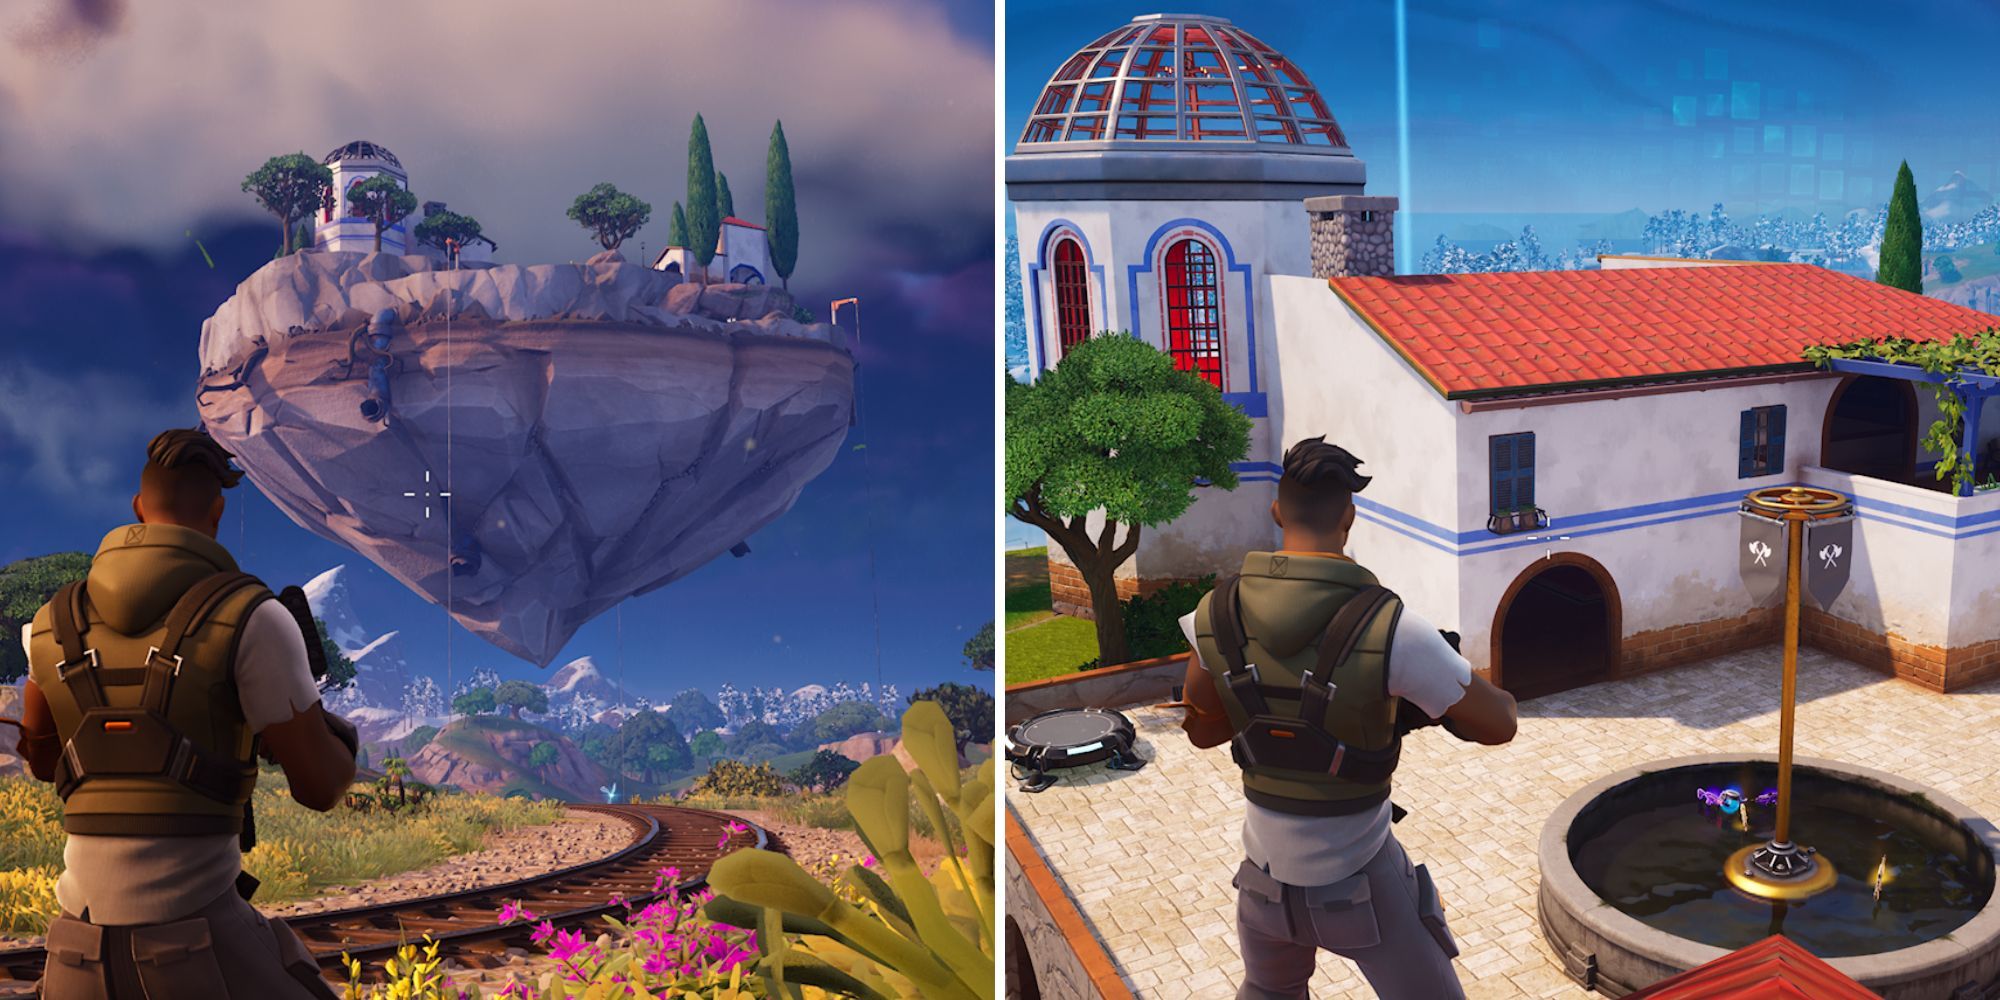 Collage of a Loot Island seen from the ground and from the rooftops on the island in Fortnite.